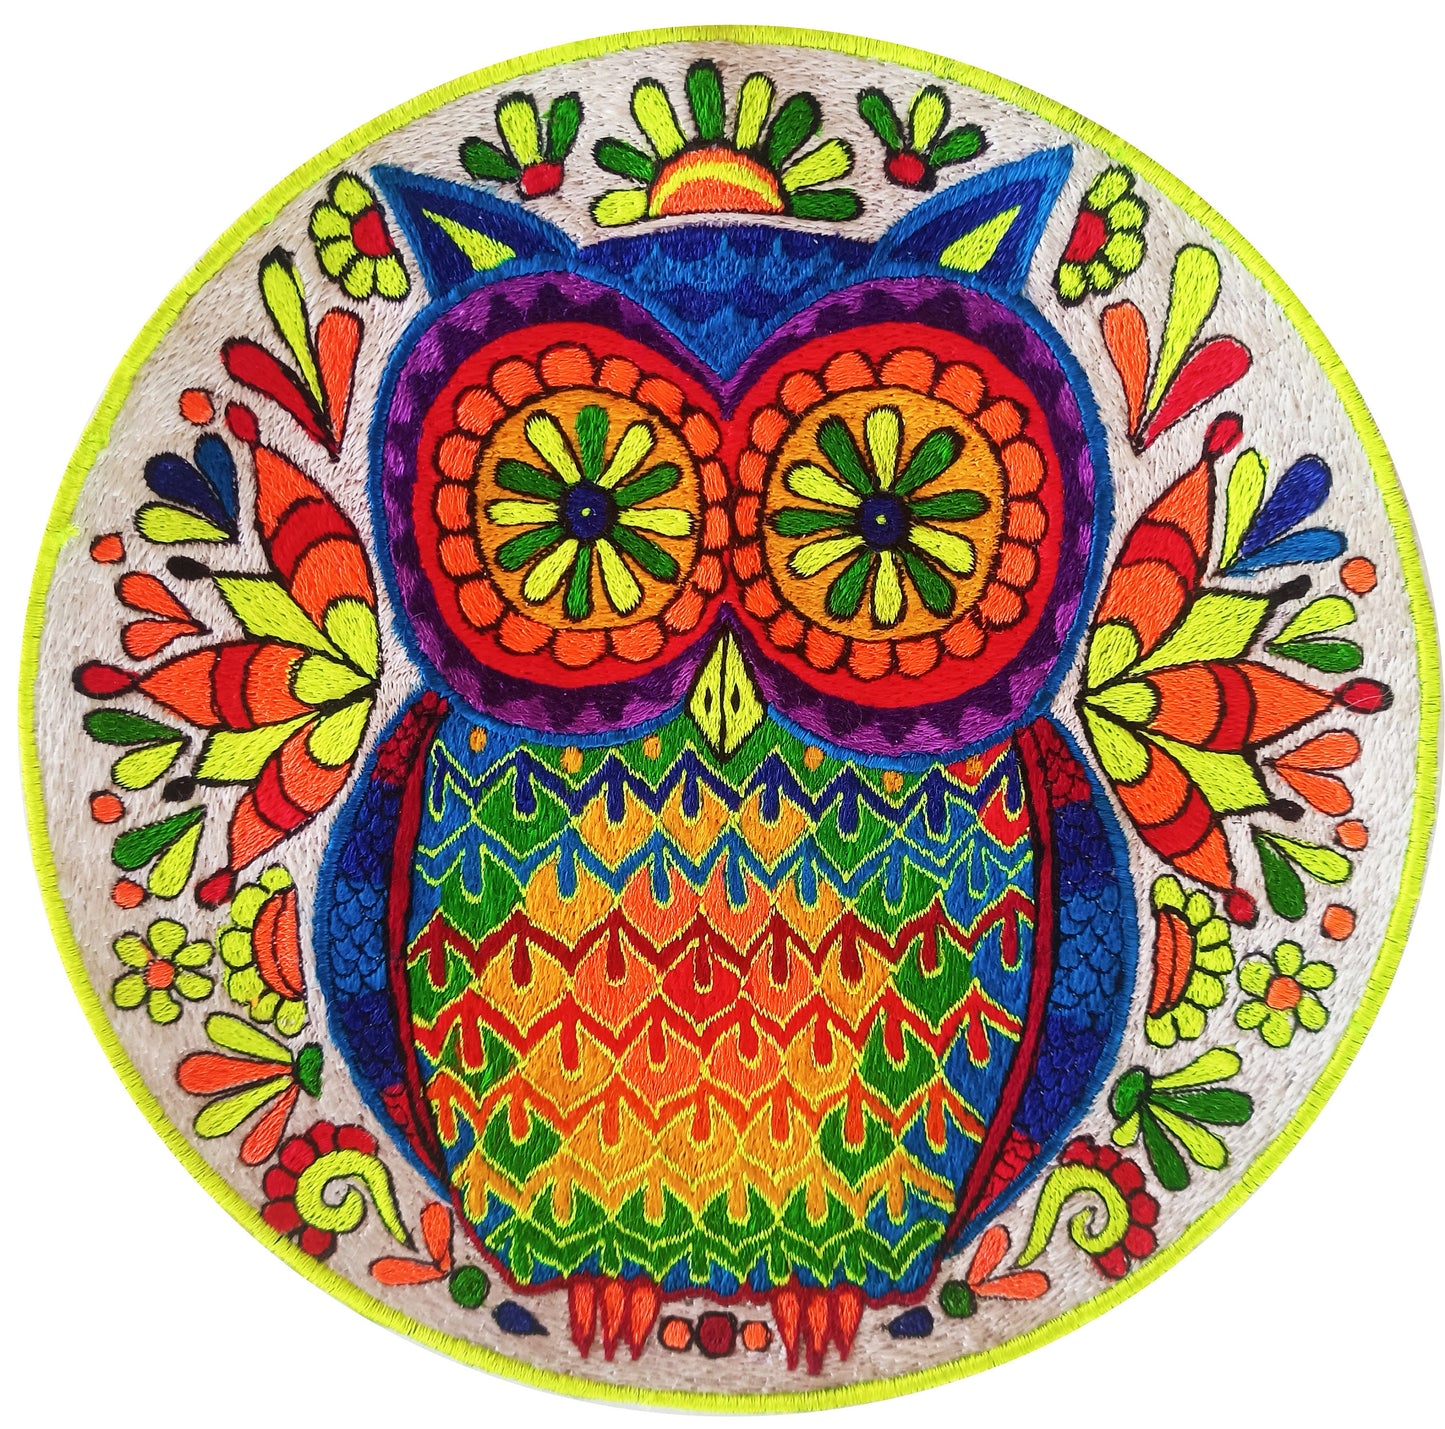 The Psychedelic Rainbow Owl embroidery patch blacklight active handmade masterpiece art